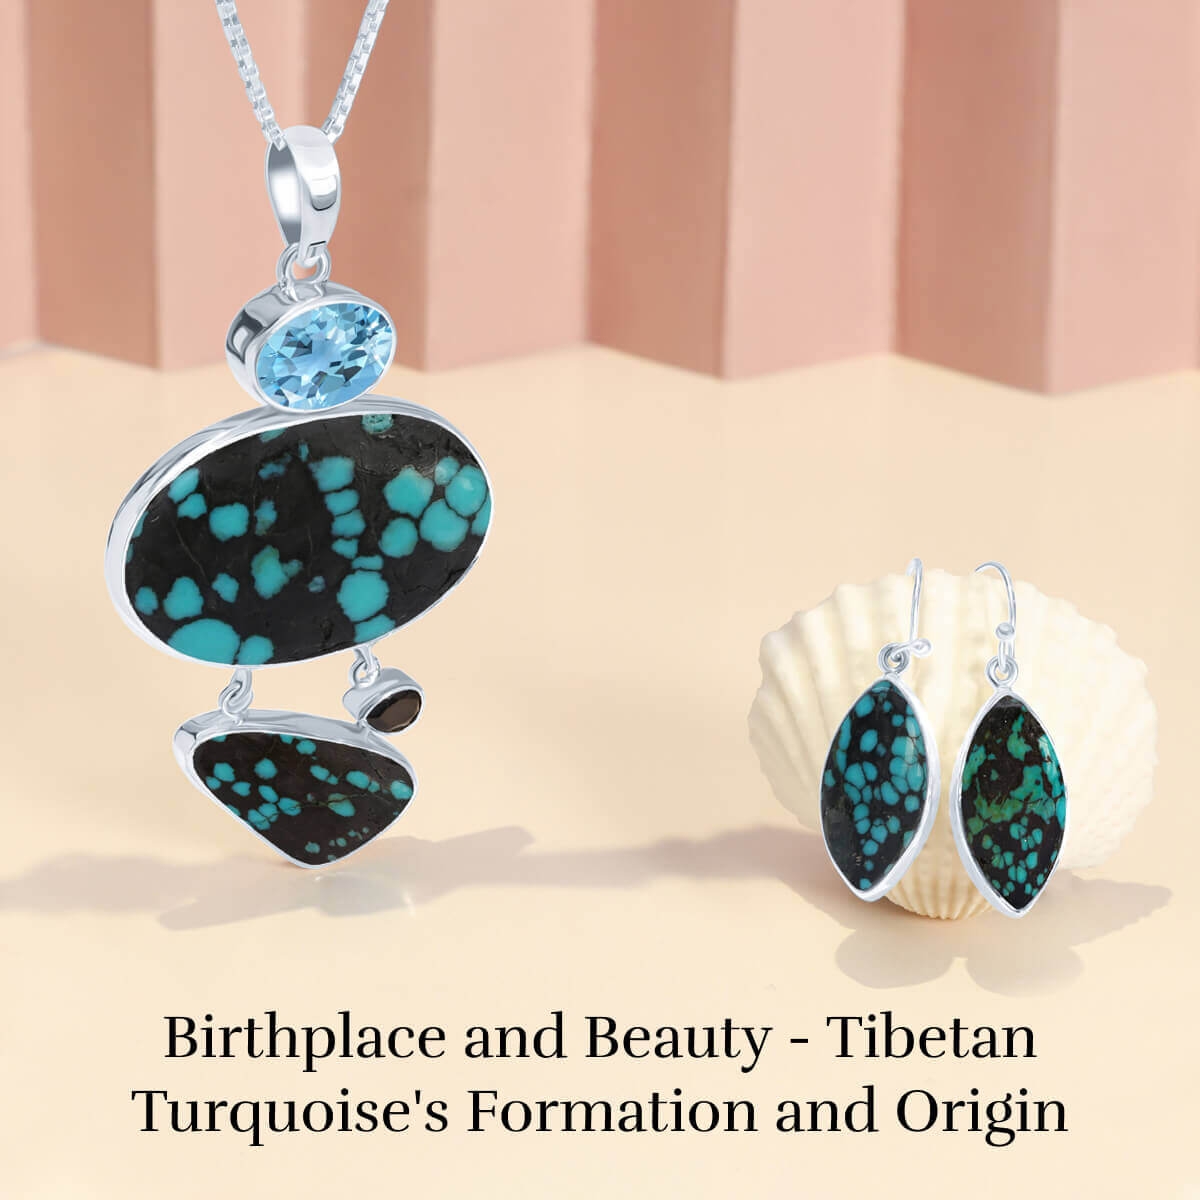 Tibetan Turquoise How It is Formed & Where It is Found